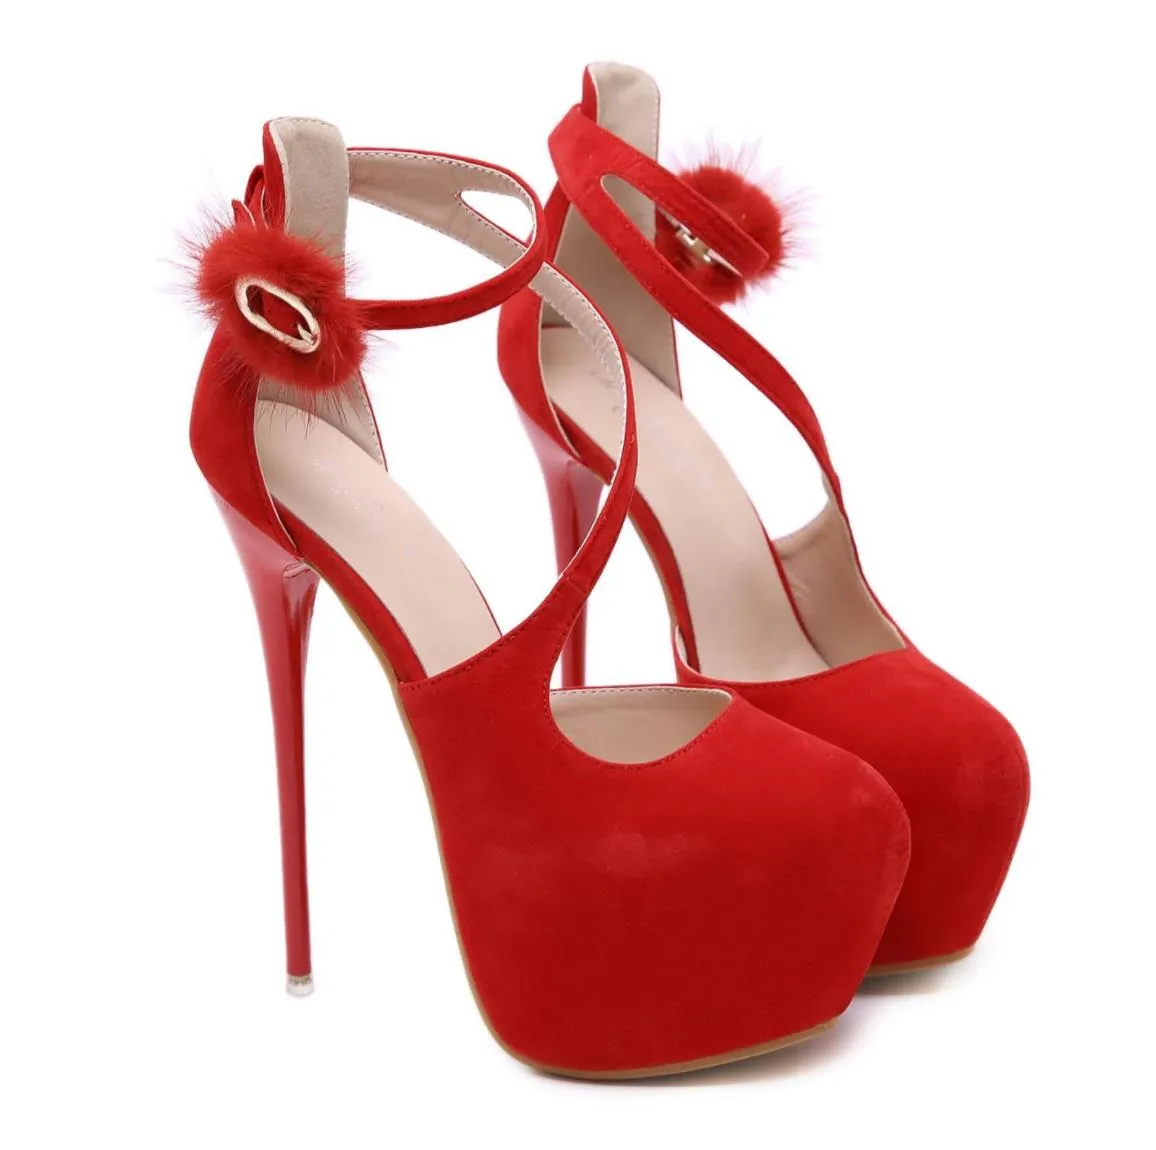 17cm with box sexy prom shoes luxury bridal wedding shoes red suede fur decorated high heels size 34 to 40